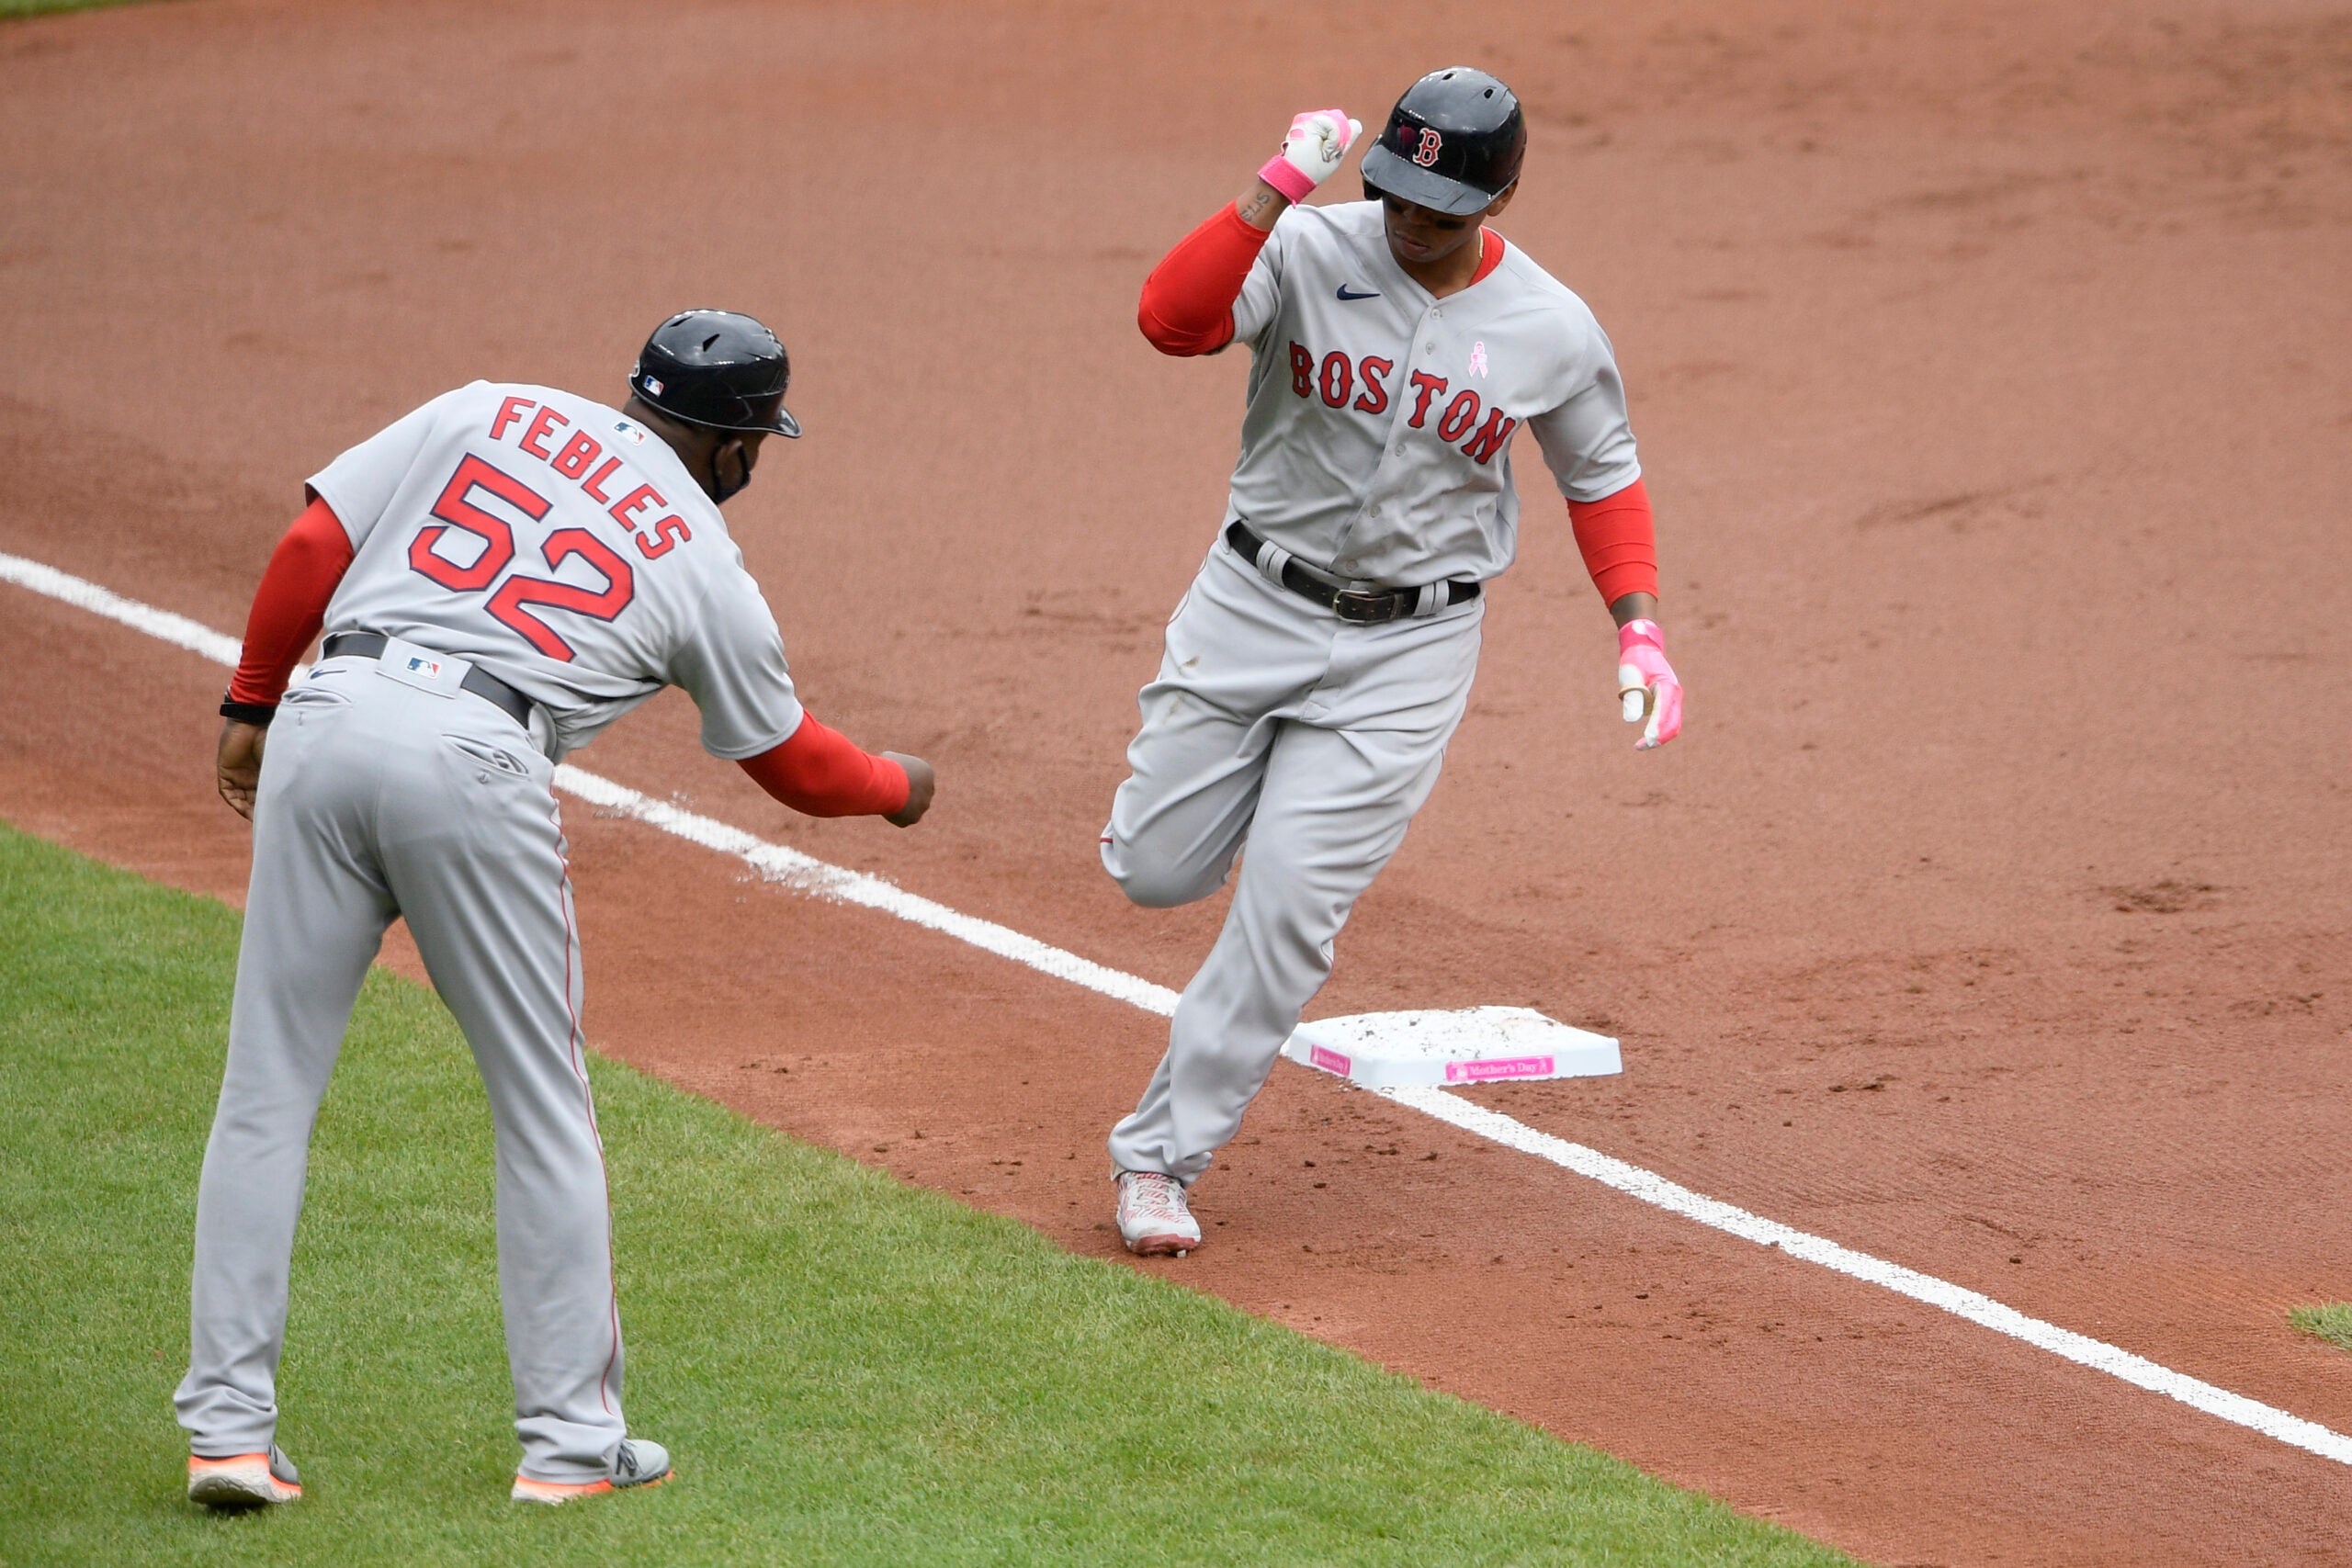 It's you guys that don't believe in us': Rafael Devers, Red Sox